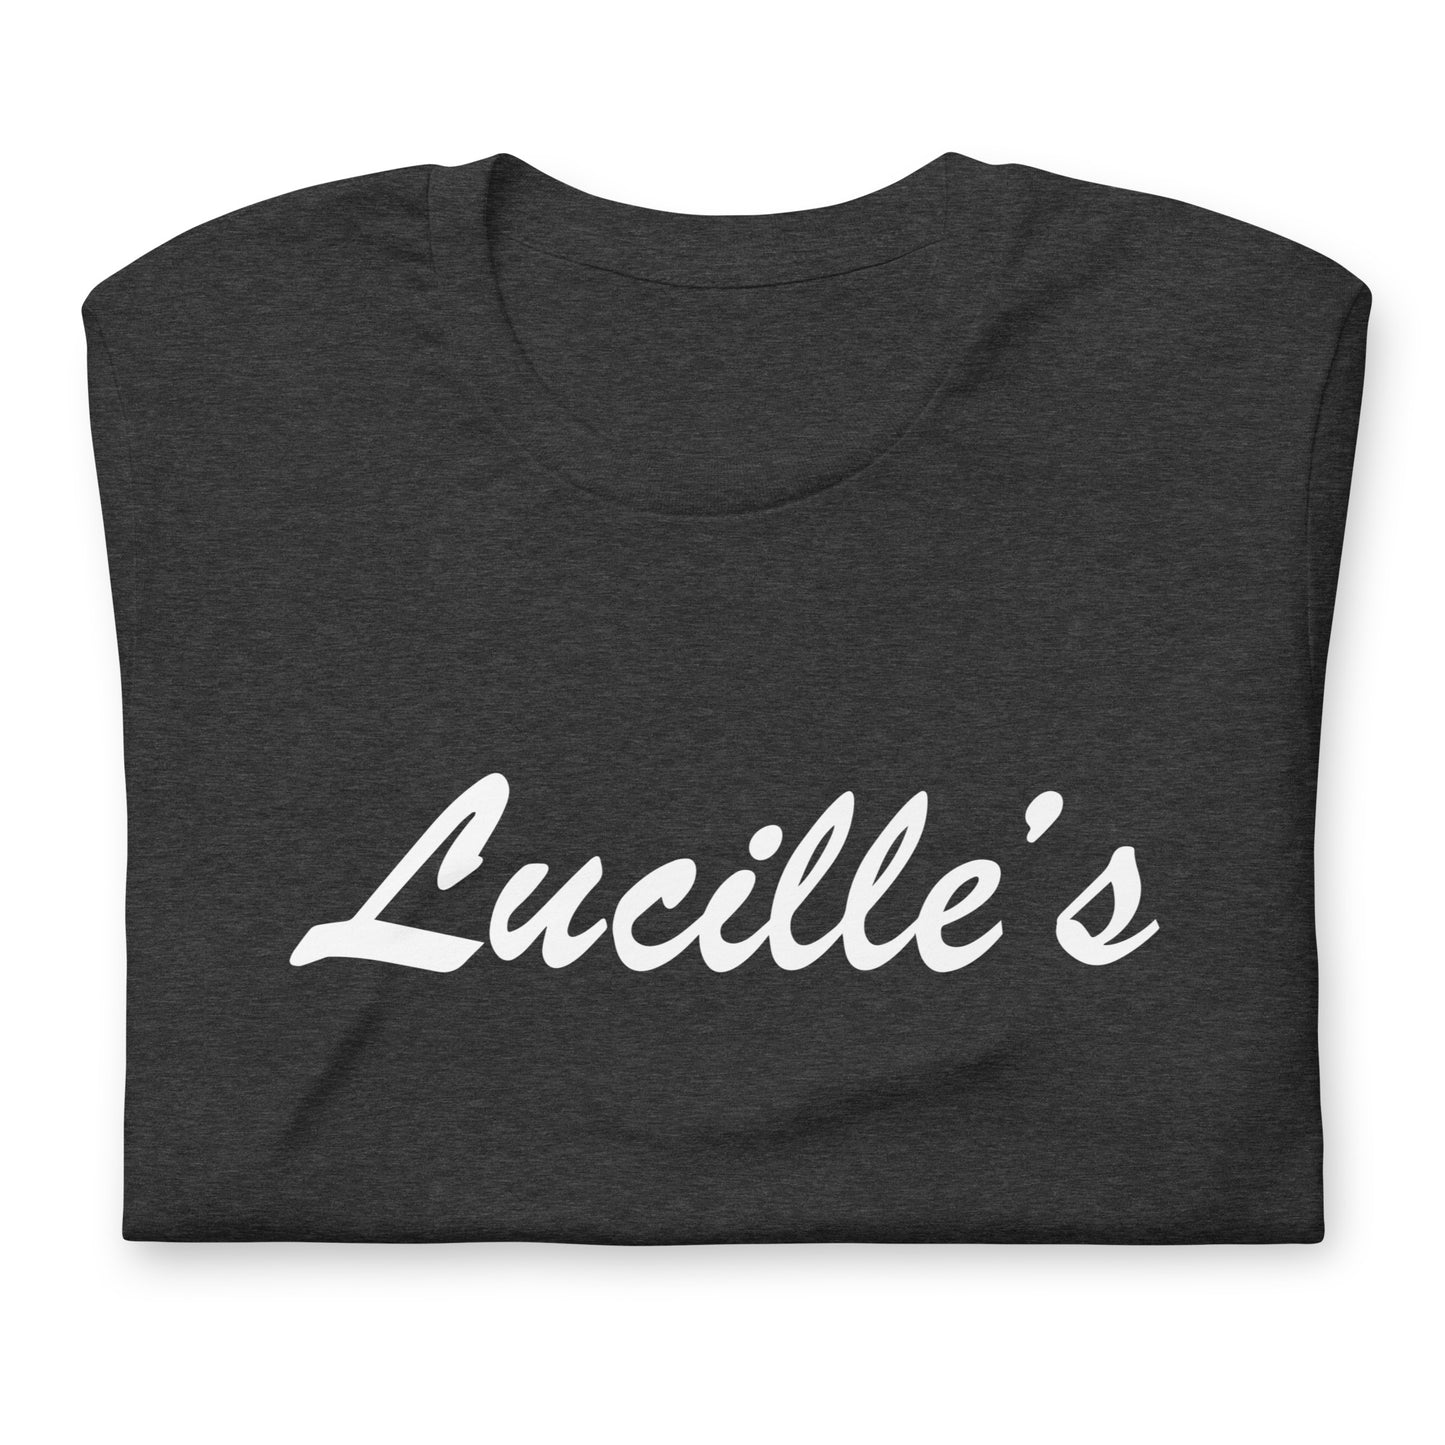 Lucille's unisex printed t-shirt